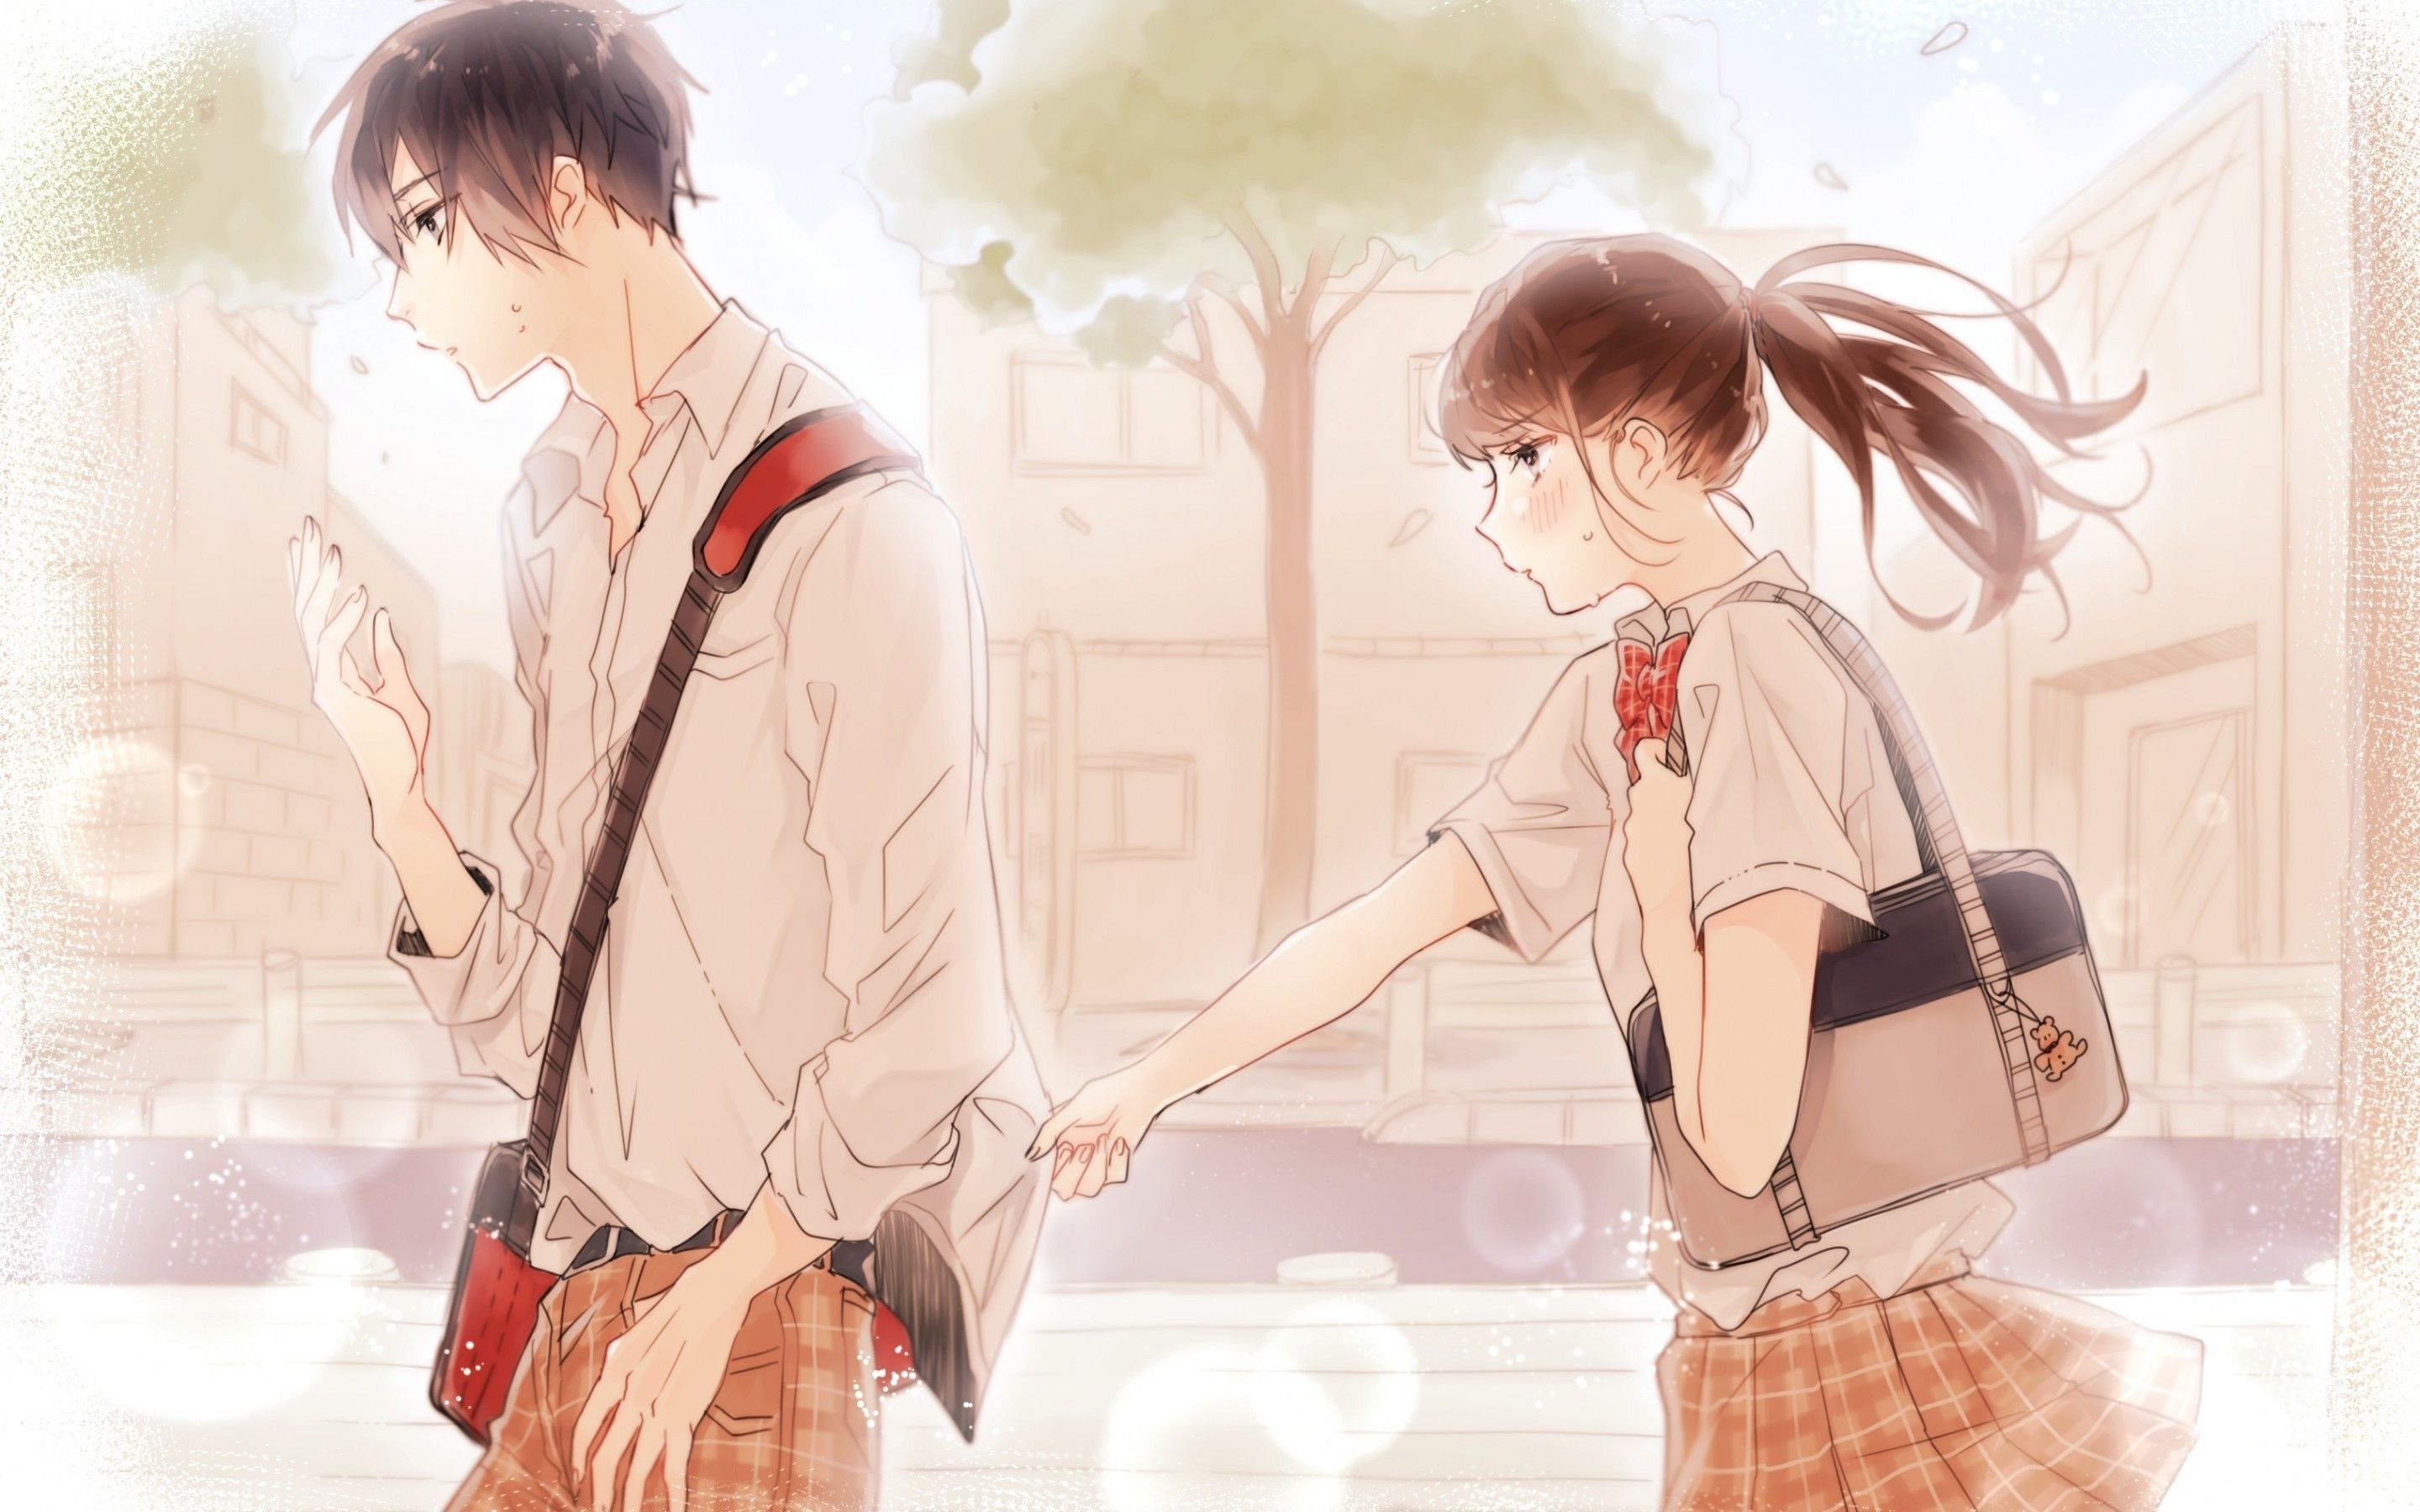 Beautiful Romantic Anime Couple Wallpapers - Wallpaper Cave